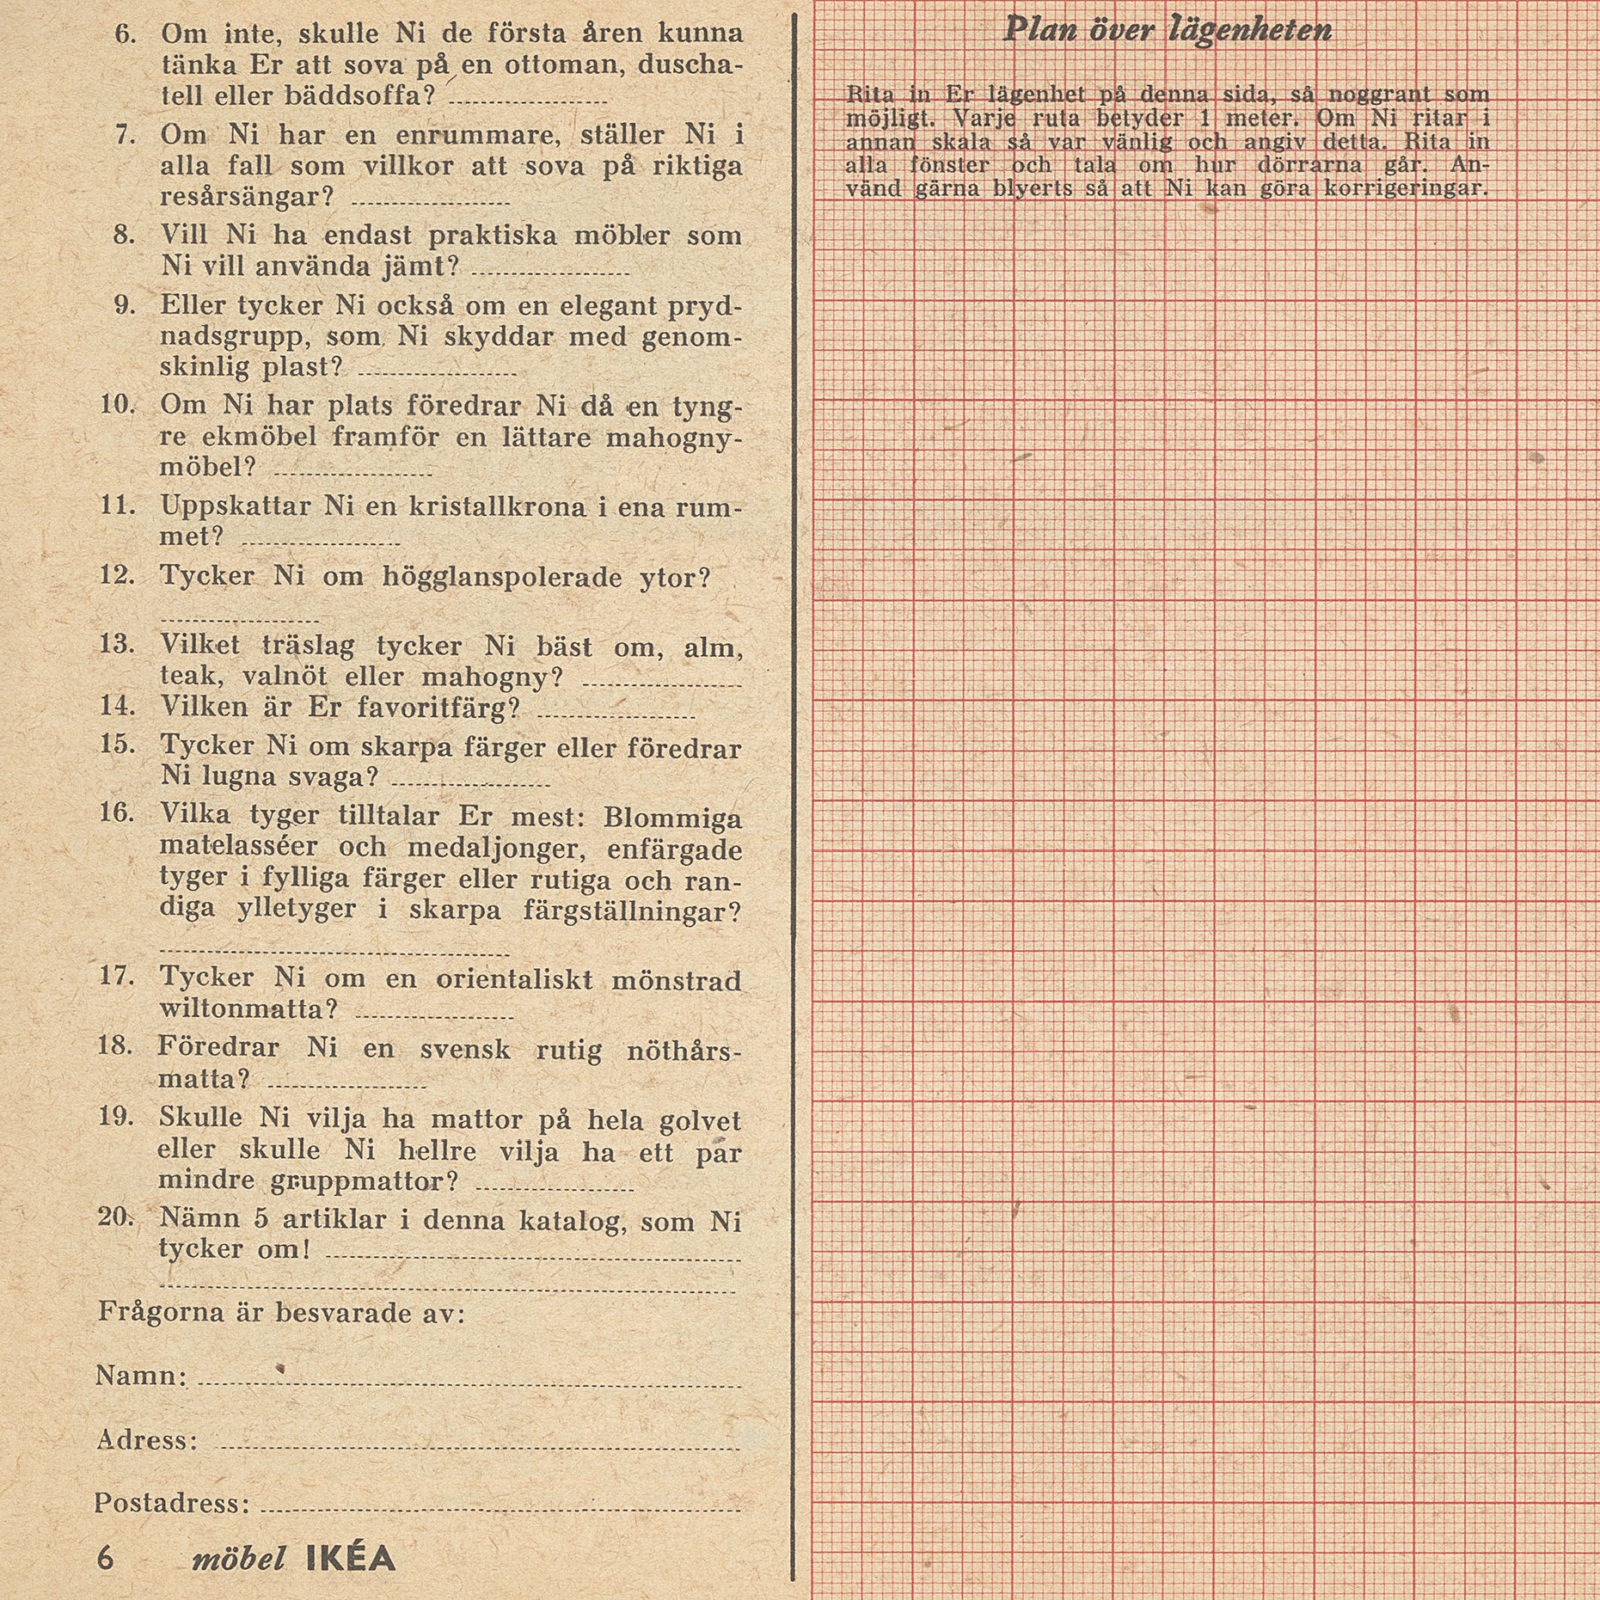 Questionnaire for customers in the 1957 IKEA catalogue, with space for sketching one’s apartment.